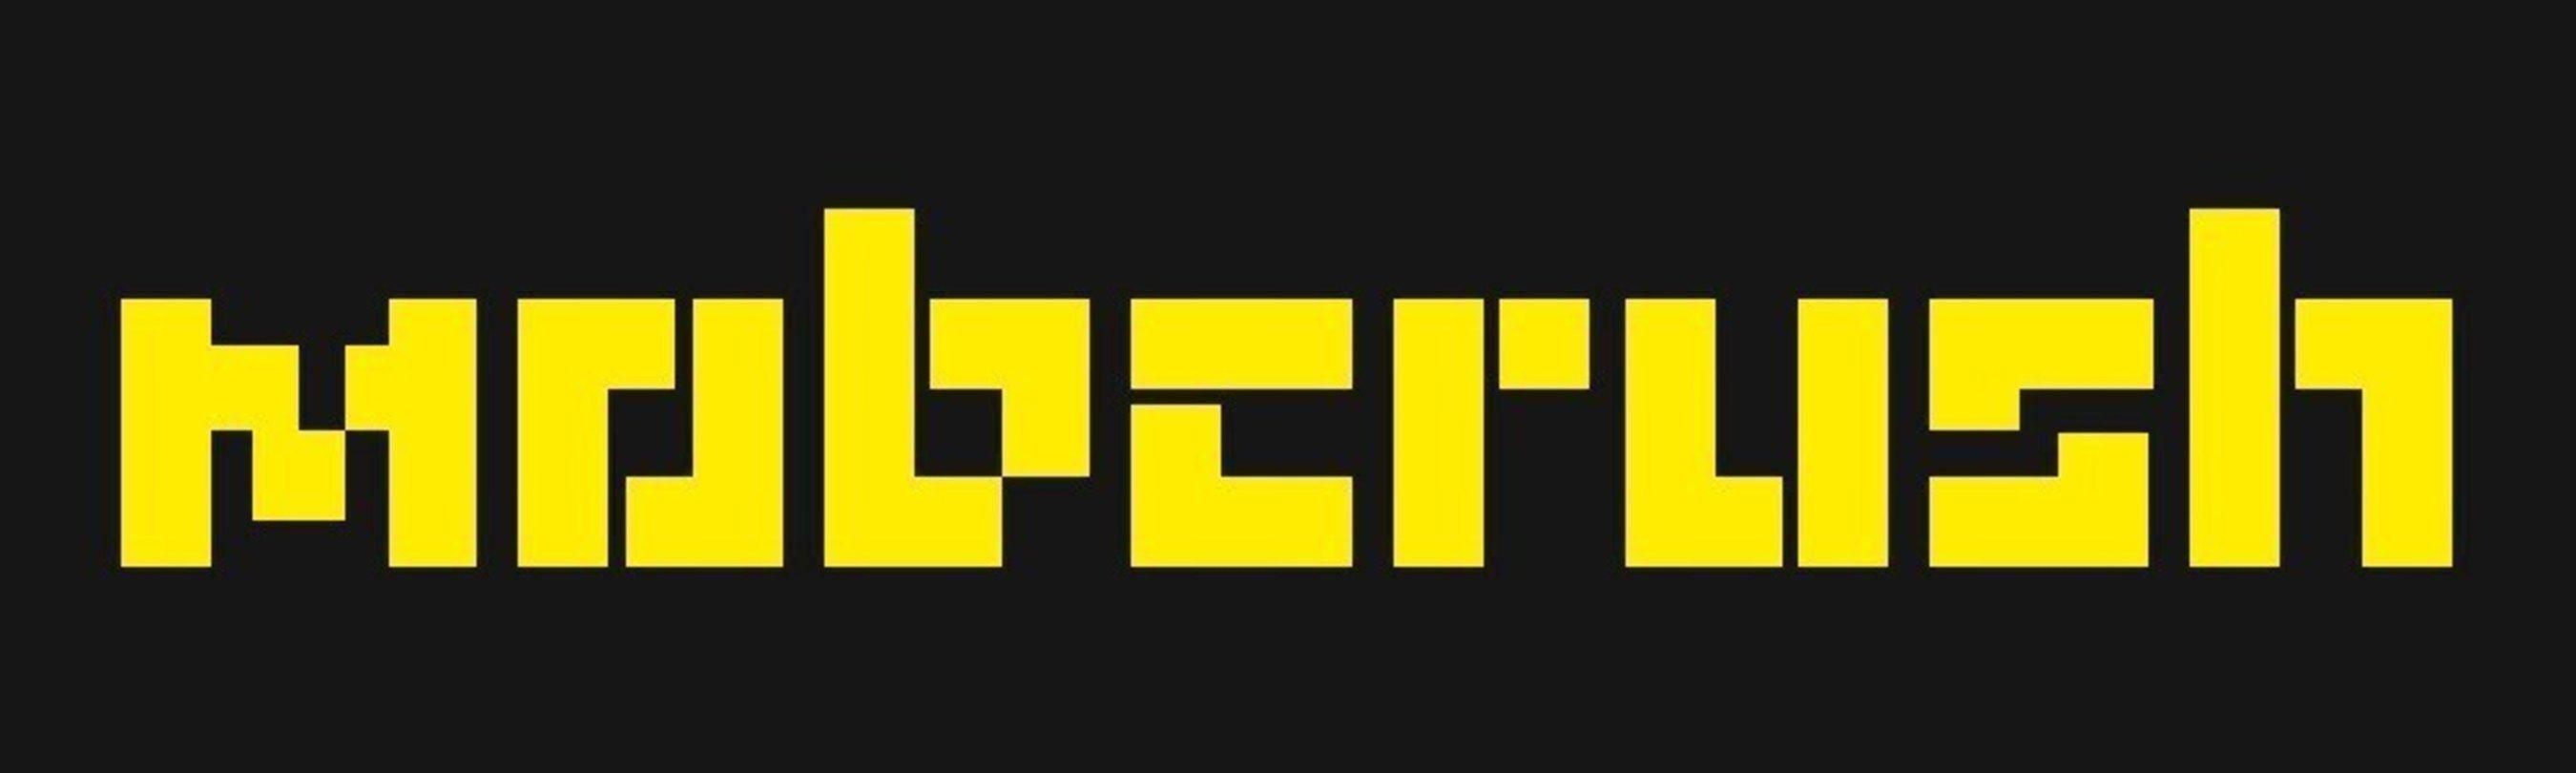 Mobcrush Logo - Mobcrush Livestreaming Platform Launches Globally, Connecting the ...